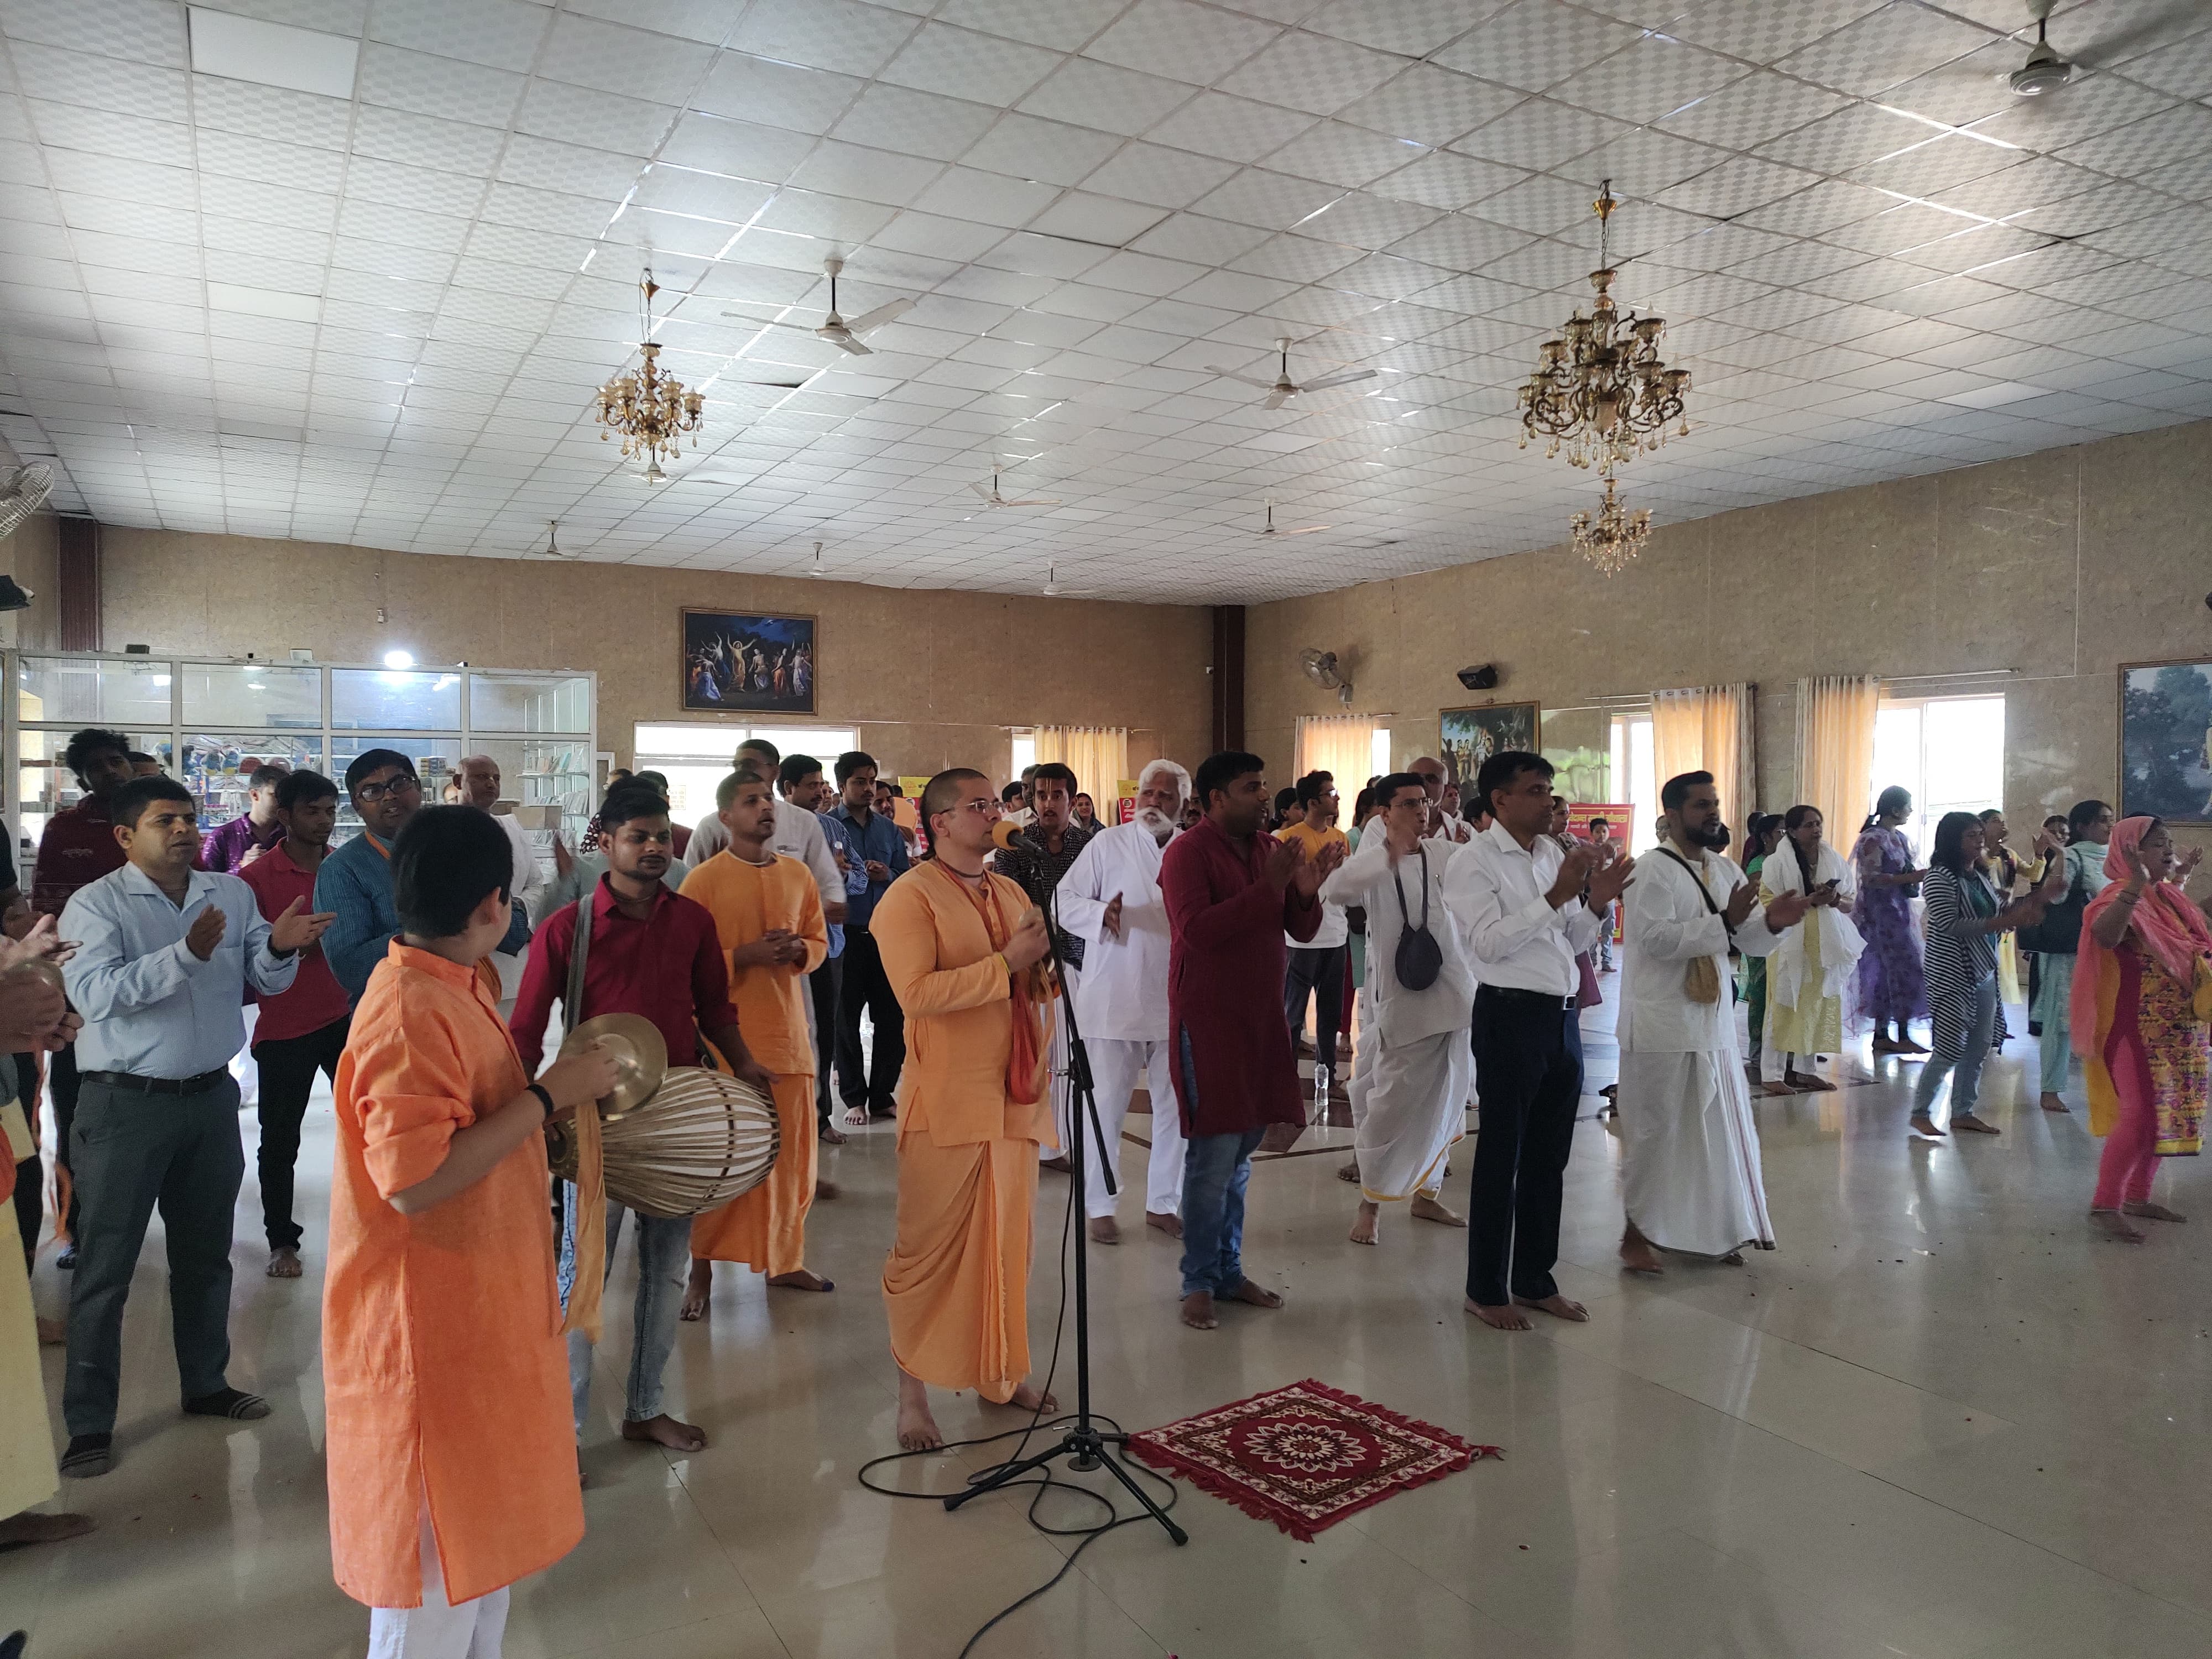 ISKCON temple celebrated "Ram Navami" with great pomp and show by chanting mantras and offering floral tributes.